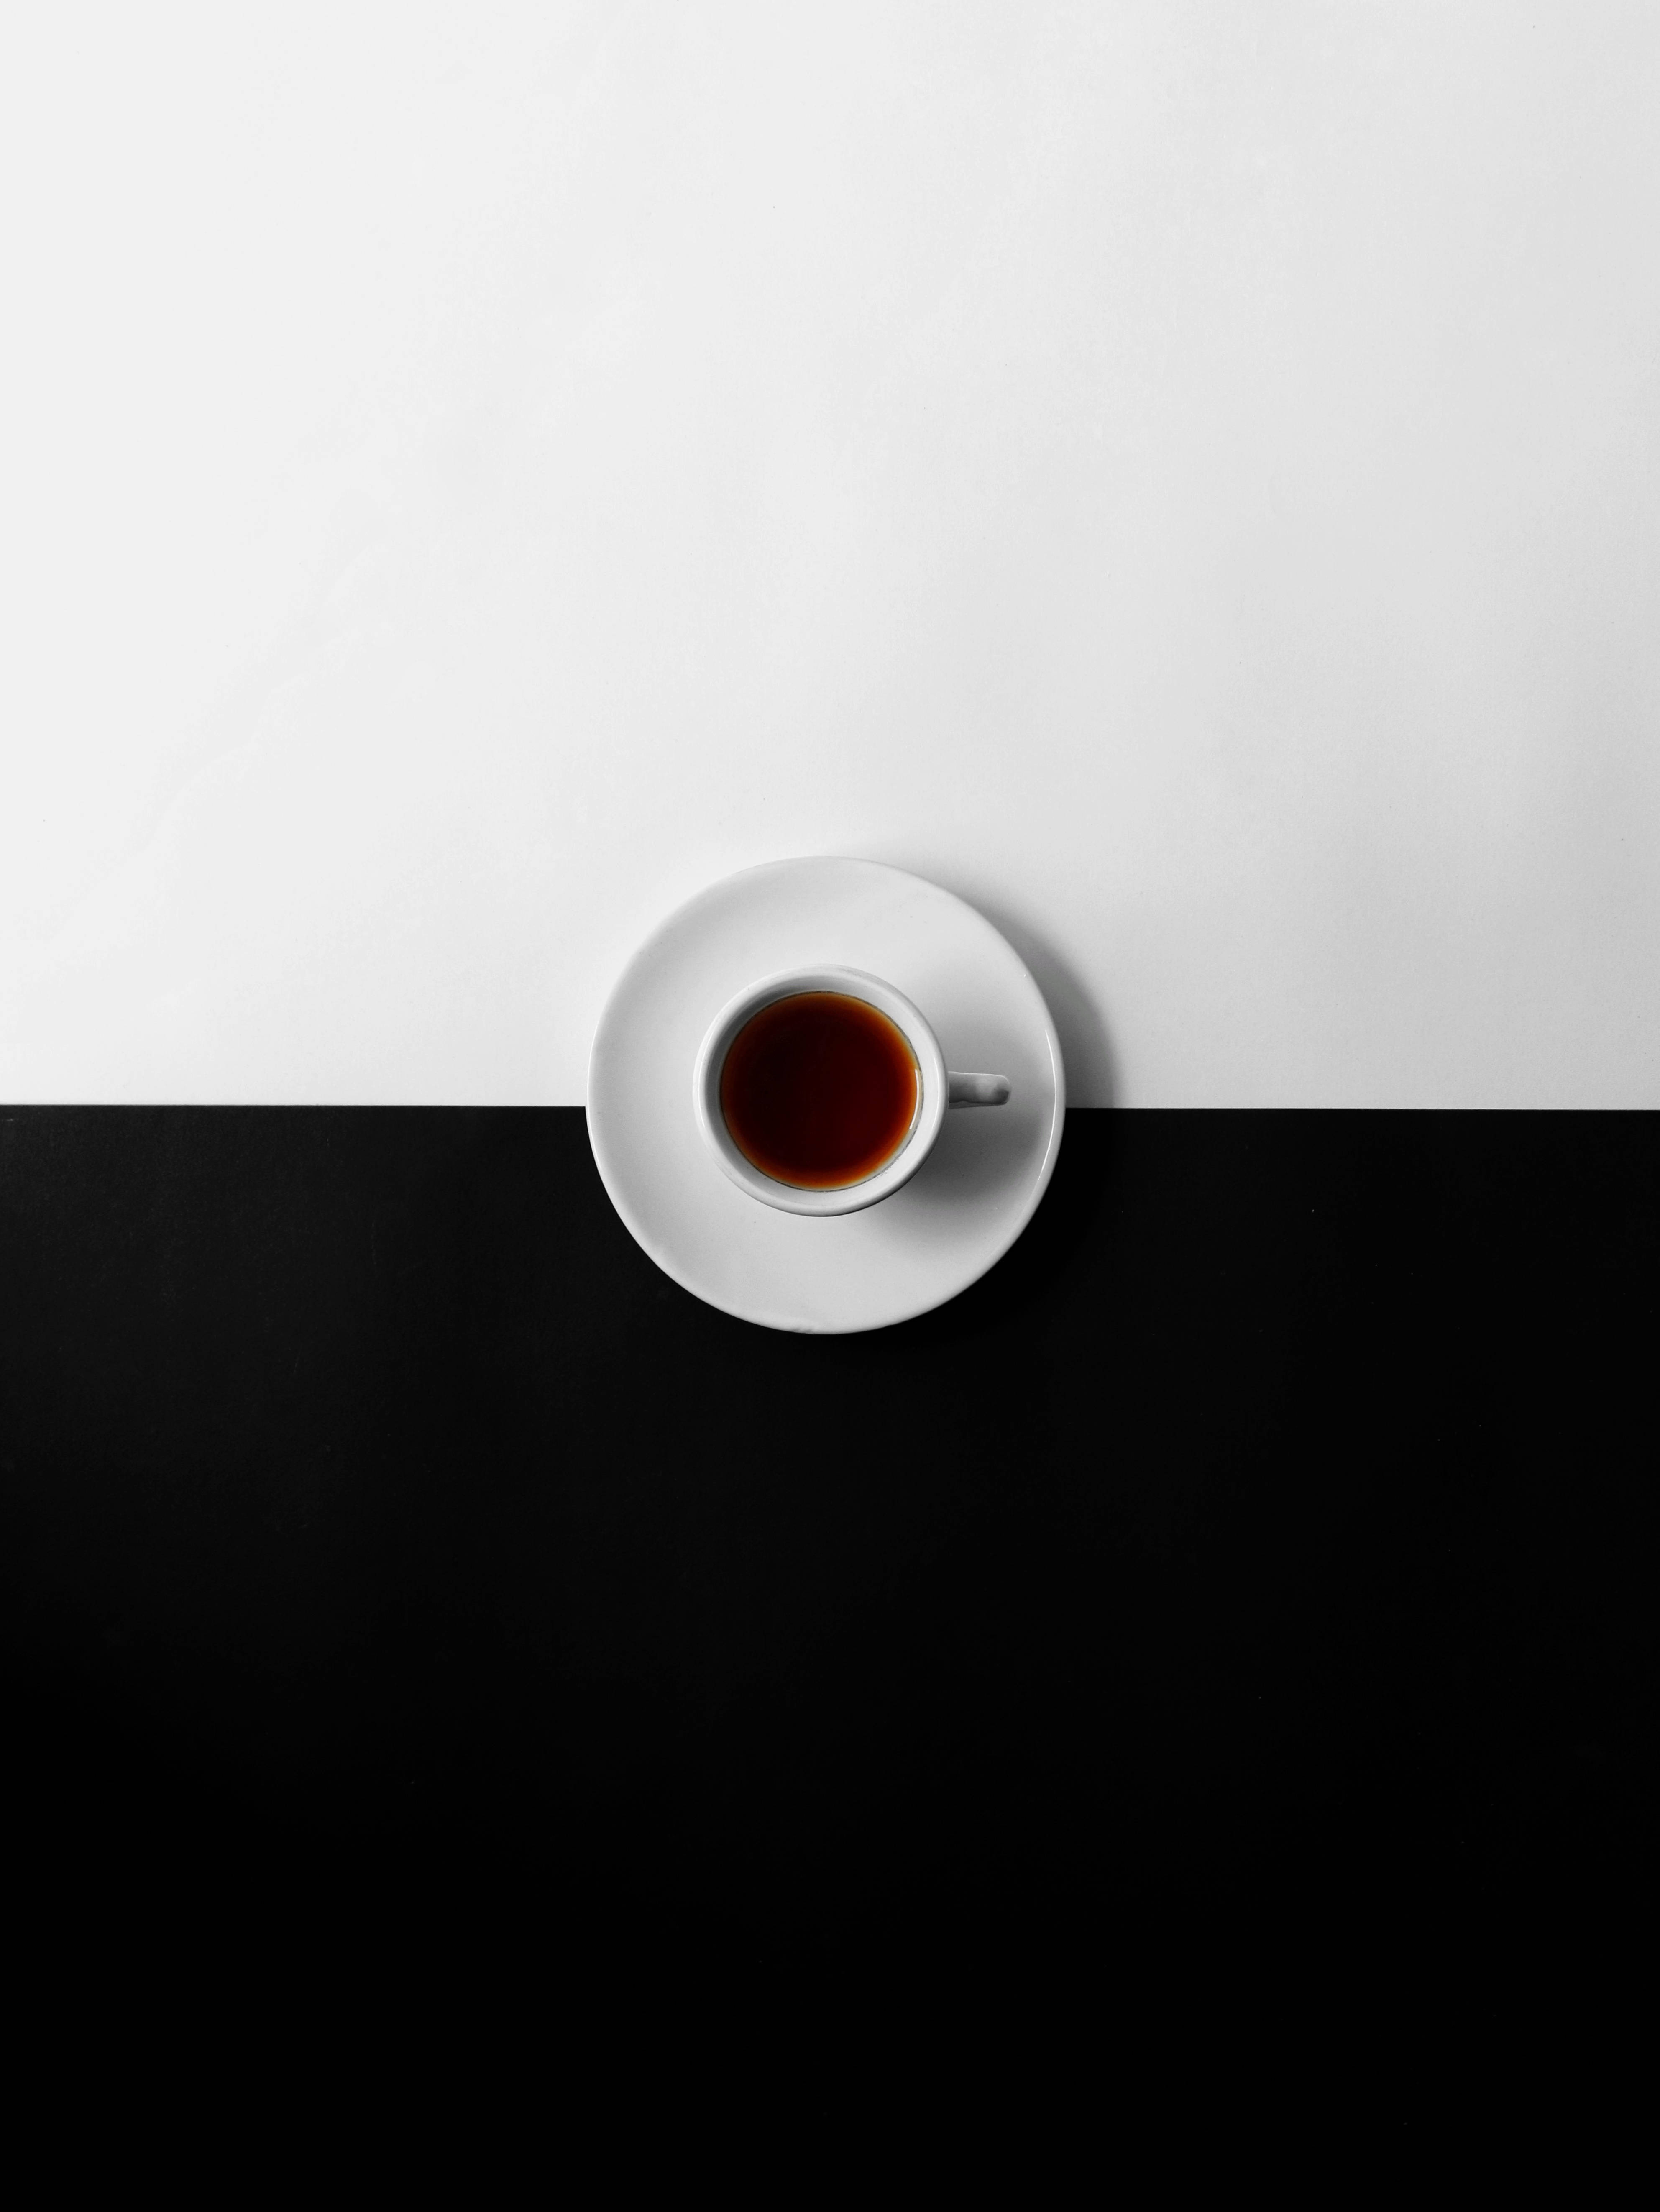 A cup of tea on top an empty plate - Coffee